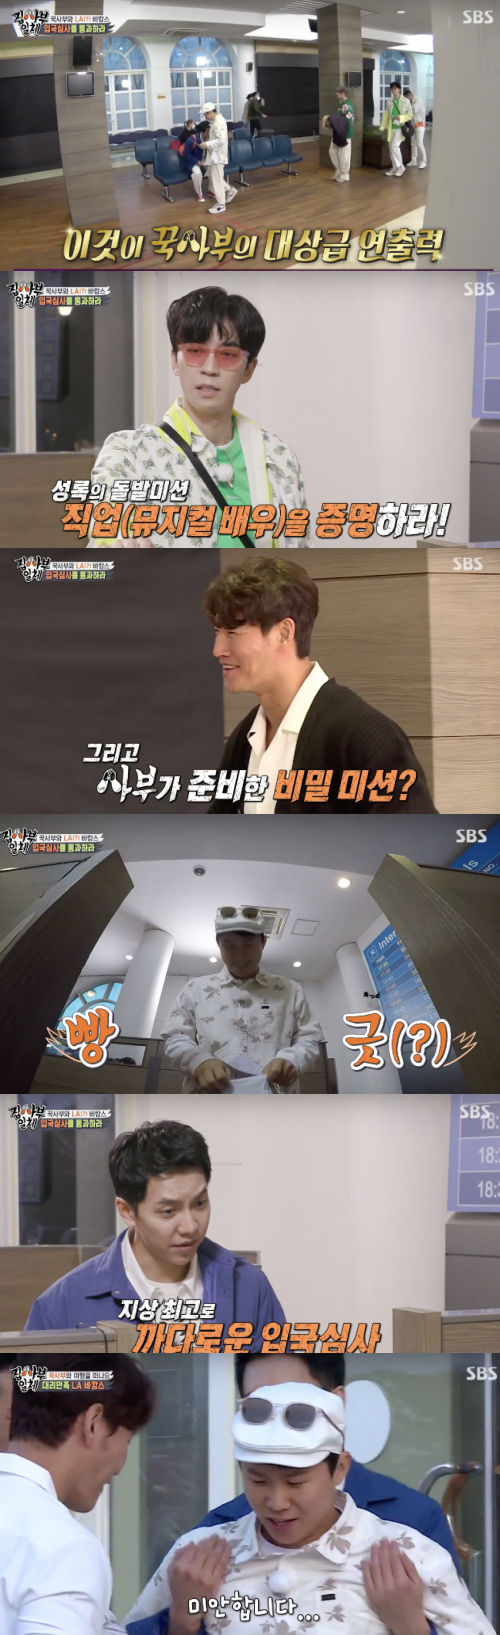 Kim Jong-kook prepared for a substitute trip to LA at All The Butlers, and Kim Dong-Hyun and Revenge were played in five years and added fun.Master Kim Jong-kook appeared on SBS entertainment All The Butlers, which aired on the 18th.Kim Jong-kook, who appeared as a high-protein steel master on the day, said, I will travel to LA for the same heart-warming viewers these days when I can not travel.The members said, Why is LA? Kim Jong-kook also said, I often go to the point where there is a rumor that my wife and child are present, and I can not go because of Corona this year.Kim Jong-kook said, We should be completely over-indulged instead. When the members said, I am excited to hear the real story, it seems to have come.I arrived at English language village in Paju.Kim Jong-kook asked each English language name to introduce his English language name, saying that the English language name was JK.Lee Seung-gi laughed when he said, I am English language name Vincent, a name given by a missionary in junior high school. Vincent Van Gogh is also a traditional name, I am Vincent.The name of the English language teacher, Anyang Academy, gave it to him, said Jung Eun-woo, who introduced him as Felix, and Kim Jong-kook was the weakest Anyang battle.Anyang was a pass for everything. Local currency before immigration examination (?)Kim Jong-kook decided to hand out the dollar for the exchange, and eventually Jung Eun-woo, born in Anyang, was the first to be chosen.They all moved toward the immigration desk as if they had actually entered the country, and they were all interested in saying, It feels like a real foreign country, it smells like an airport.Kim Jong-kook first demonstrated that you have to be a fool in entertainment, and you will make it funny with sudden events.Kim Dong-Hyun then demanded the money from Top Model, a suspicious examiner.If you can not pay the ticket in 30 seconds, you have to get winded. In the end, Kim Dong-Hyun failed and could not enter.Next was Yang Se-hyeong, the Top Model.In the same situation, Yang Se-hyeong shouted tip and asked him to take all the change, and he laughed at the explosion of I have bit coin.Shin Sung-rok was the Top Model; Shin Sung-rok told him to prove his job, and suddenly he showed off his musical on the spot.Lee Seung-gi and Jung Eun-woo also proved themselves and passed the entry screening; Kim Dong-Hyun was also able to succeed by Top Model.He went on to travel under the name Welcome to Masterwood, and Kim Jong-kook went to a restaurant saying, Its just a matter of mind.In fact, when a foreigner was ordered to English language, all said real foreign feeling and Kim Dong-Hyun laughed when he said ears are opening.Kim Jong-kook told the English language vocabulary on the spot, and Lee Seung-gi asked him about the opportunity to study English language, saying, Kim Jong-kooks English language classroom, LA Kim.Kim Jong-kook said, I always felt uneasy and disliked the disadvantage of not knowing my mothers trip, English language, and after 30 years I started studying English language. Everyone was surprised that it is not easy to travel with my mother.Kim Jong-kook said, I fit that well, my mother likes to exercise, I go to the gym after I go to the golf practice field.Kim Jong-kook said, I will do a pop song. Bruno Mars song was selected and the atmosphere was warm with a sweet voice.The feeling is moist, they all admired.Above all, Kim Jong-kook mentioned the game that he had suffered defeat humiliation in wrestling with Kim Dong-Hyun five years ago.A thigh-revenge wrestling match with the pride of the two unfolded, and Kim Jong-kook eventually won the strategy.Kim Jong-kook moved to the hostel and opened a one-point exercise lesson, saying, If you are tired, you have to exercise deliciously.Capture All The Butlers Broadcast Screen